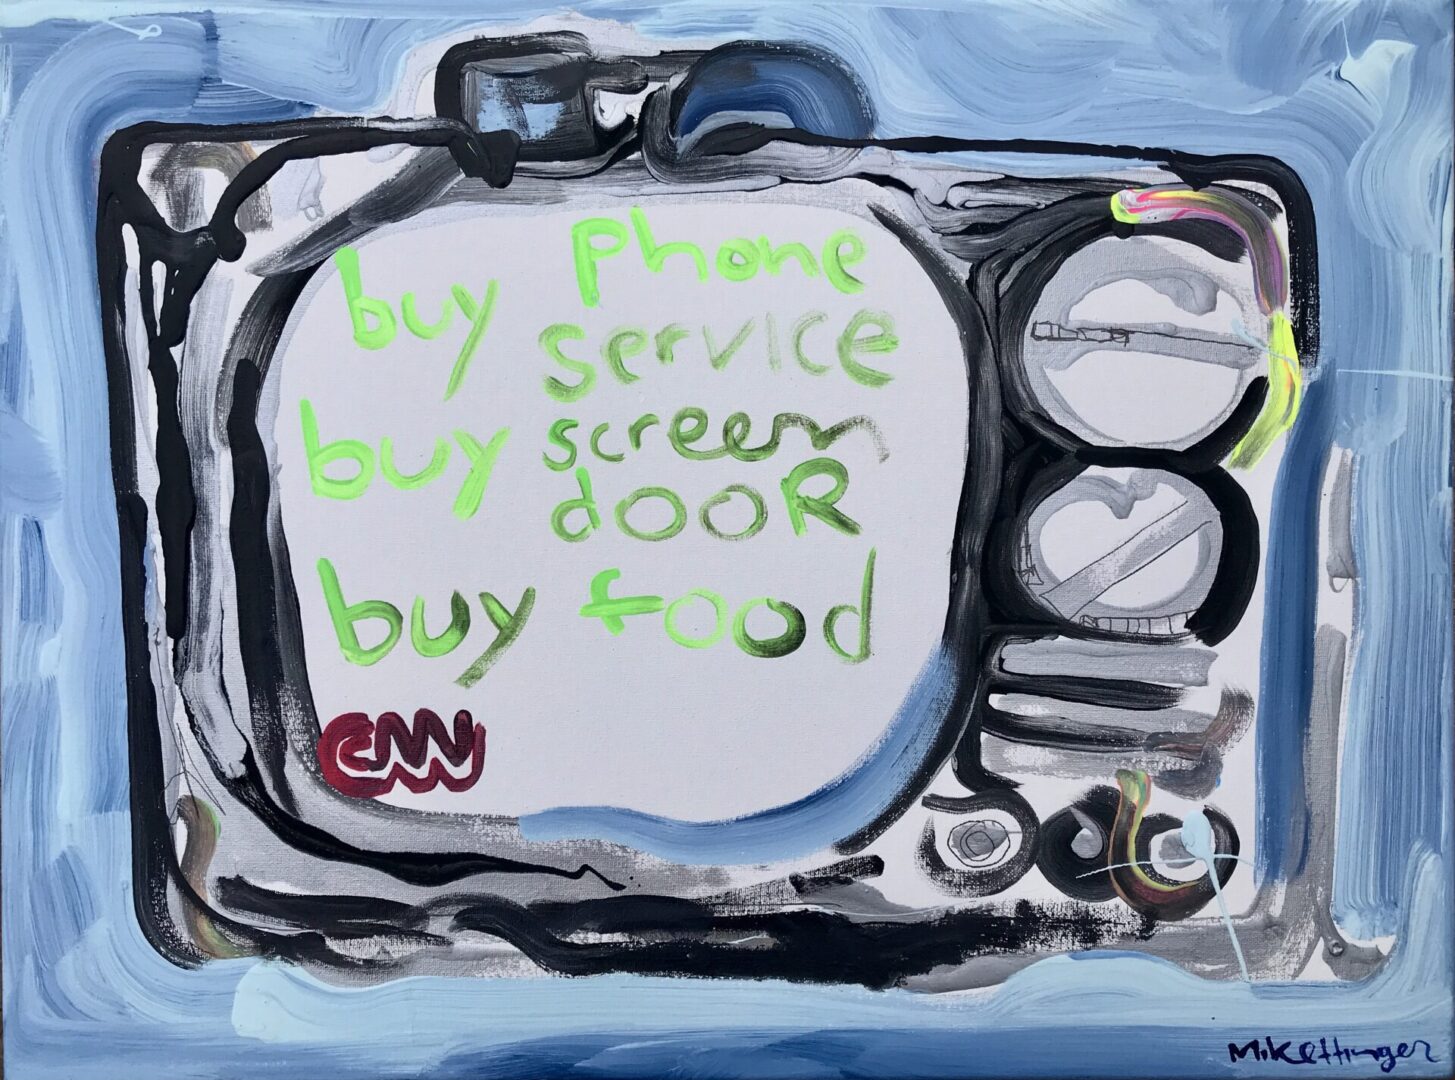 Oil painting of television and something written under it